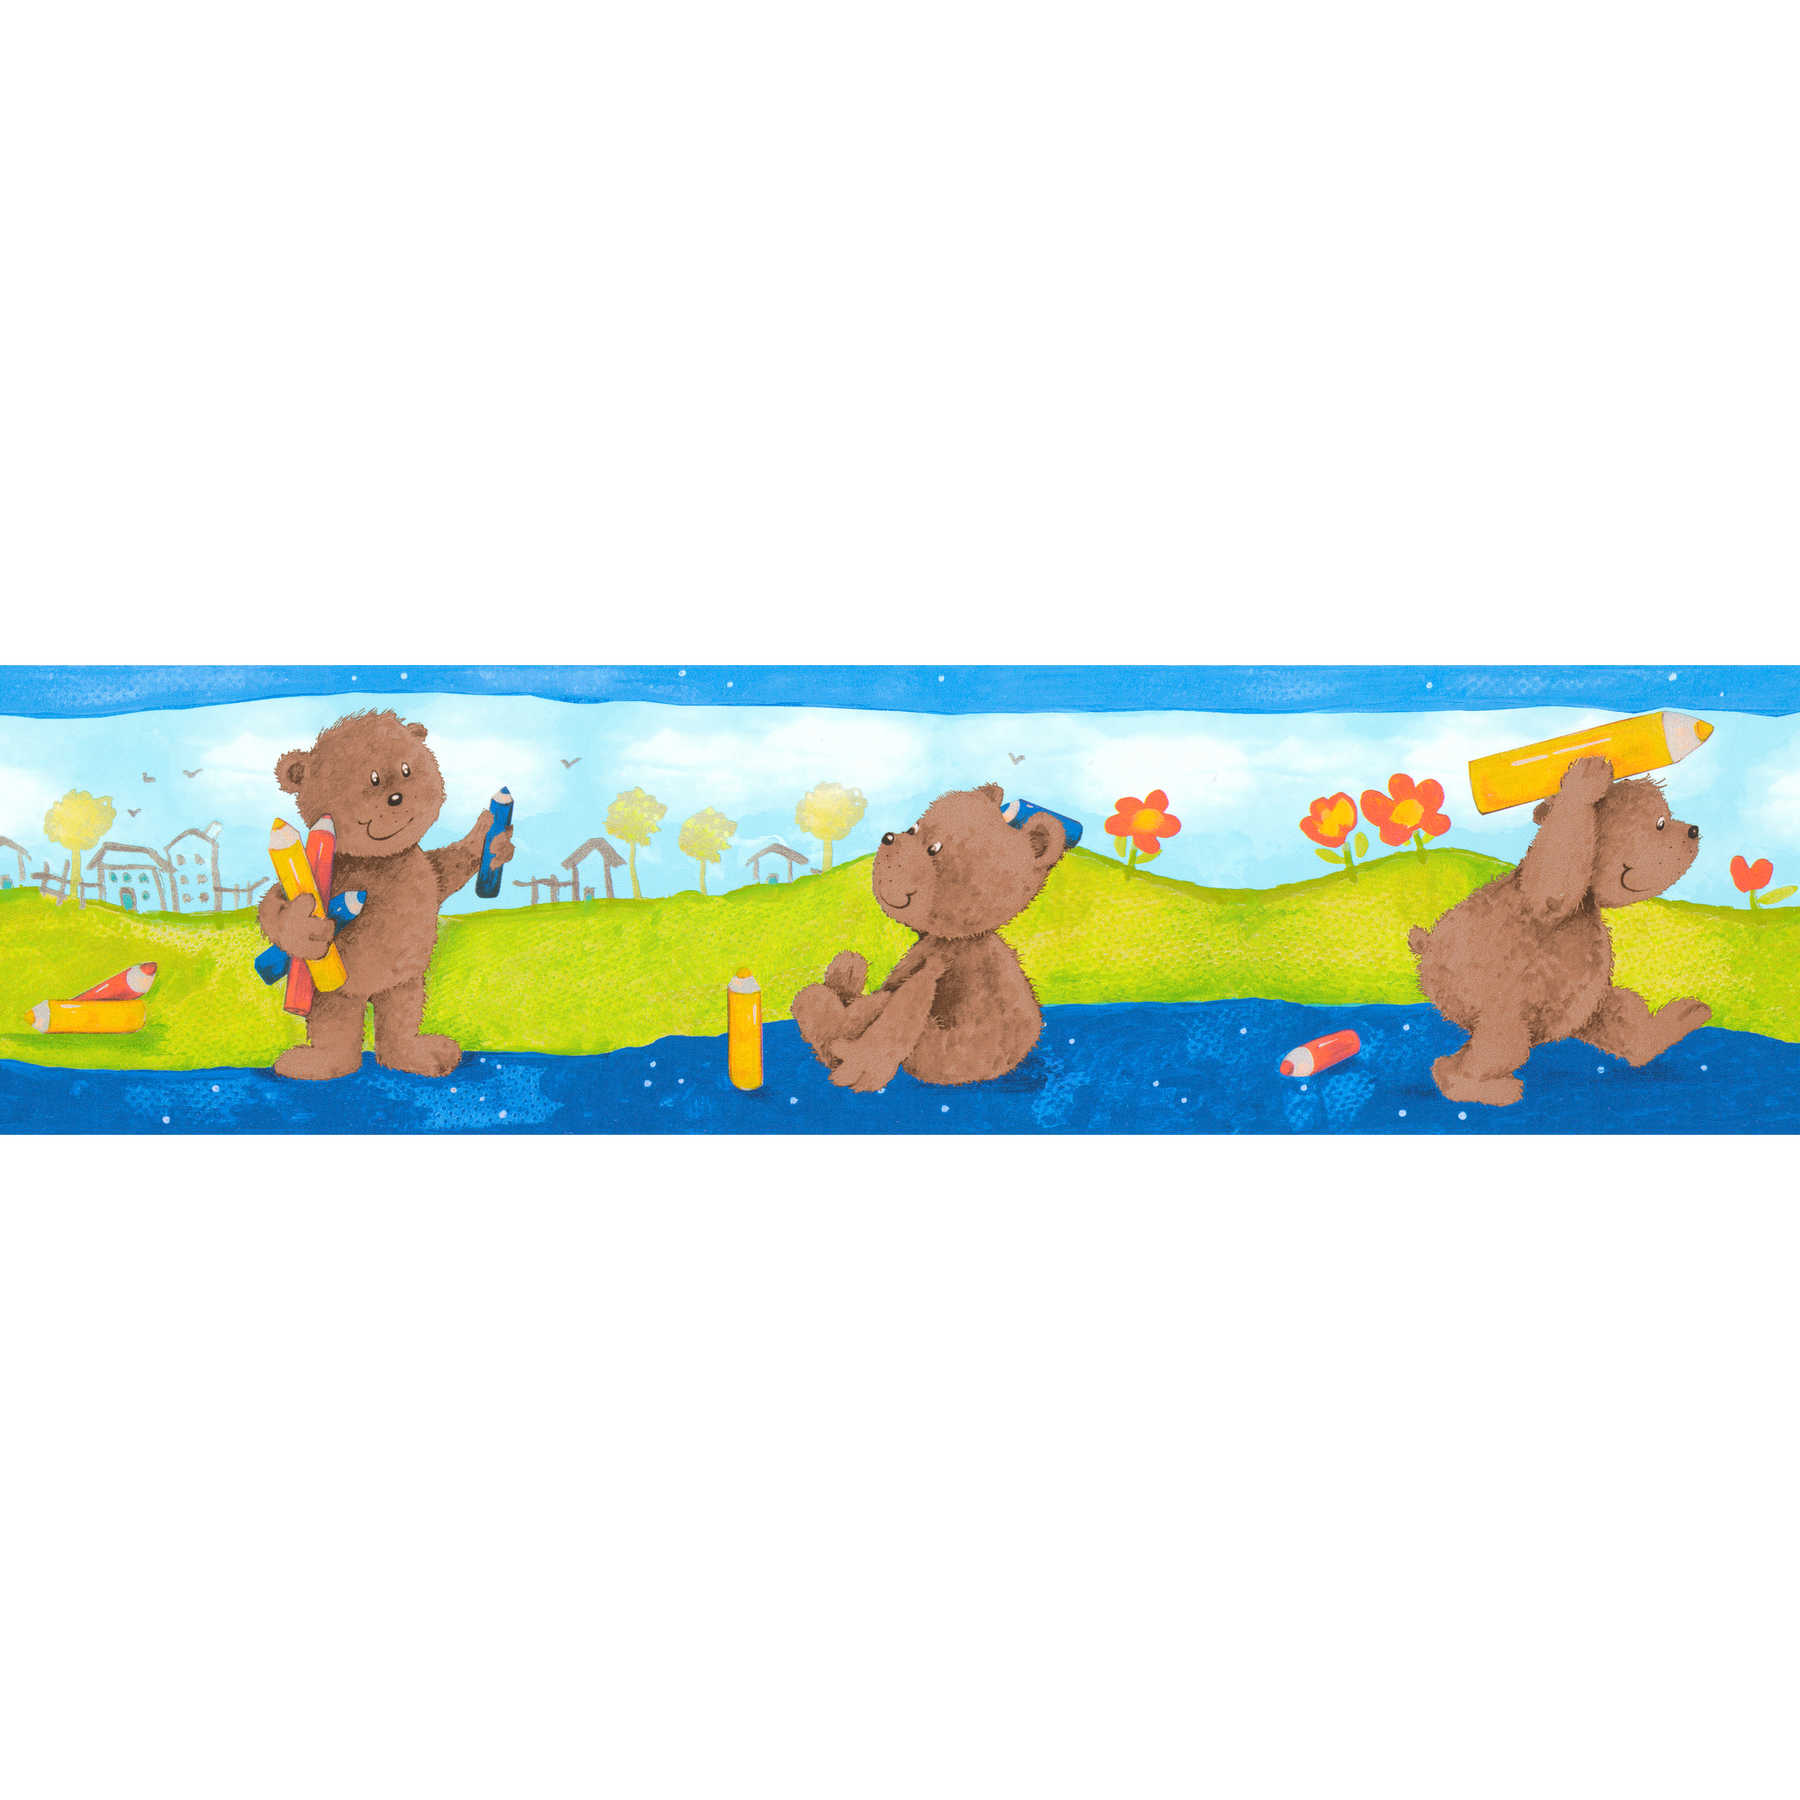 Nursery border with colourful teddy pattern - Colorful
